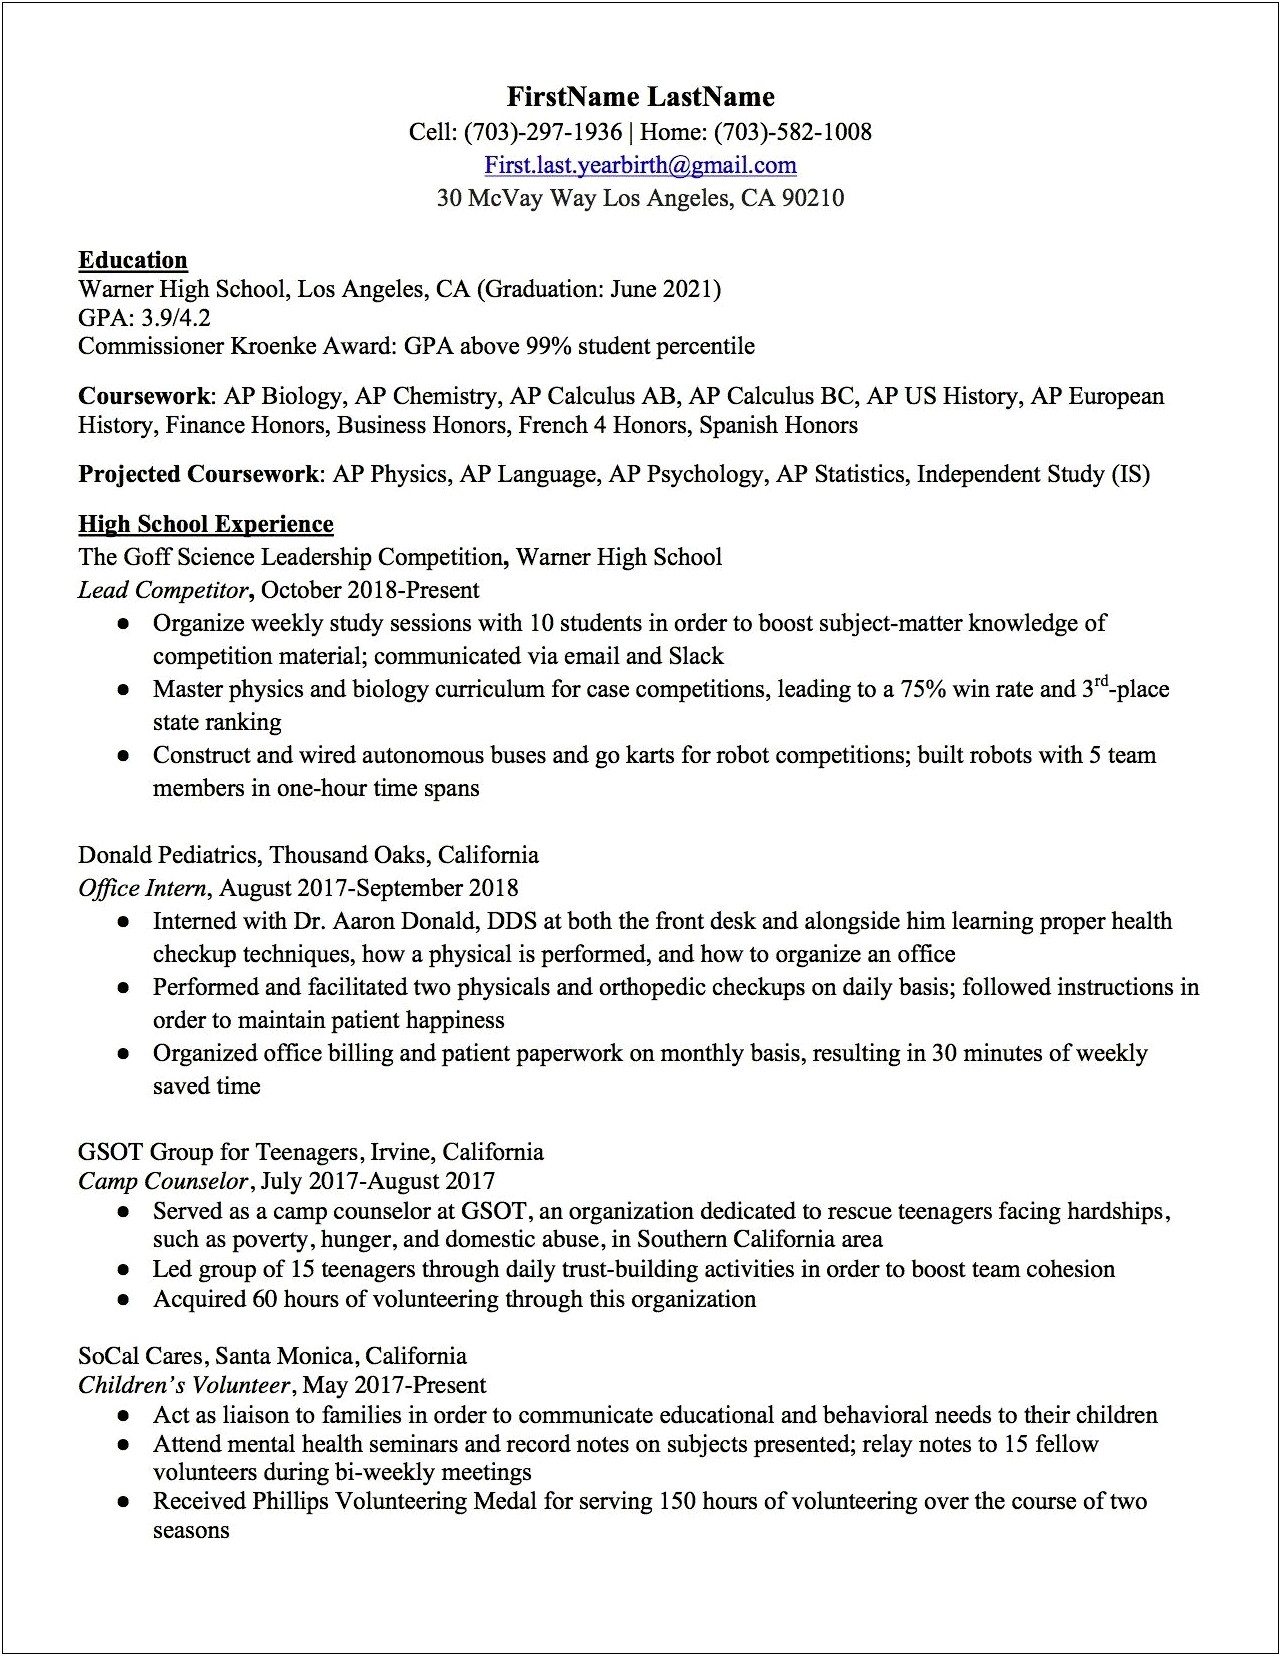 Resume Format School At Top Or Bottom